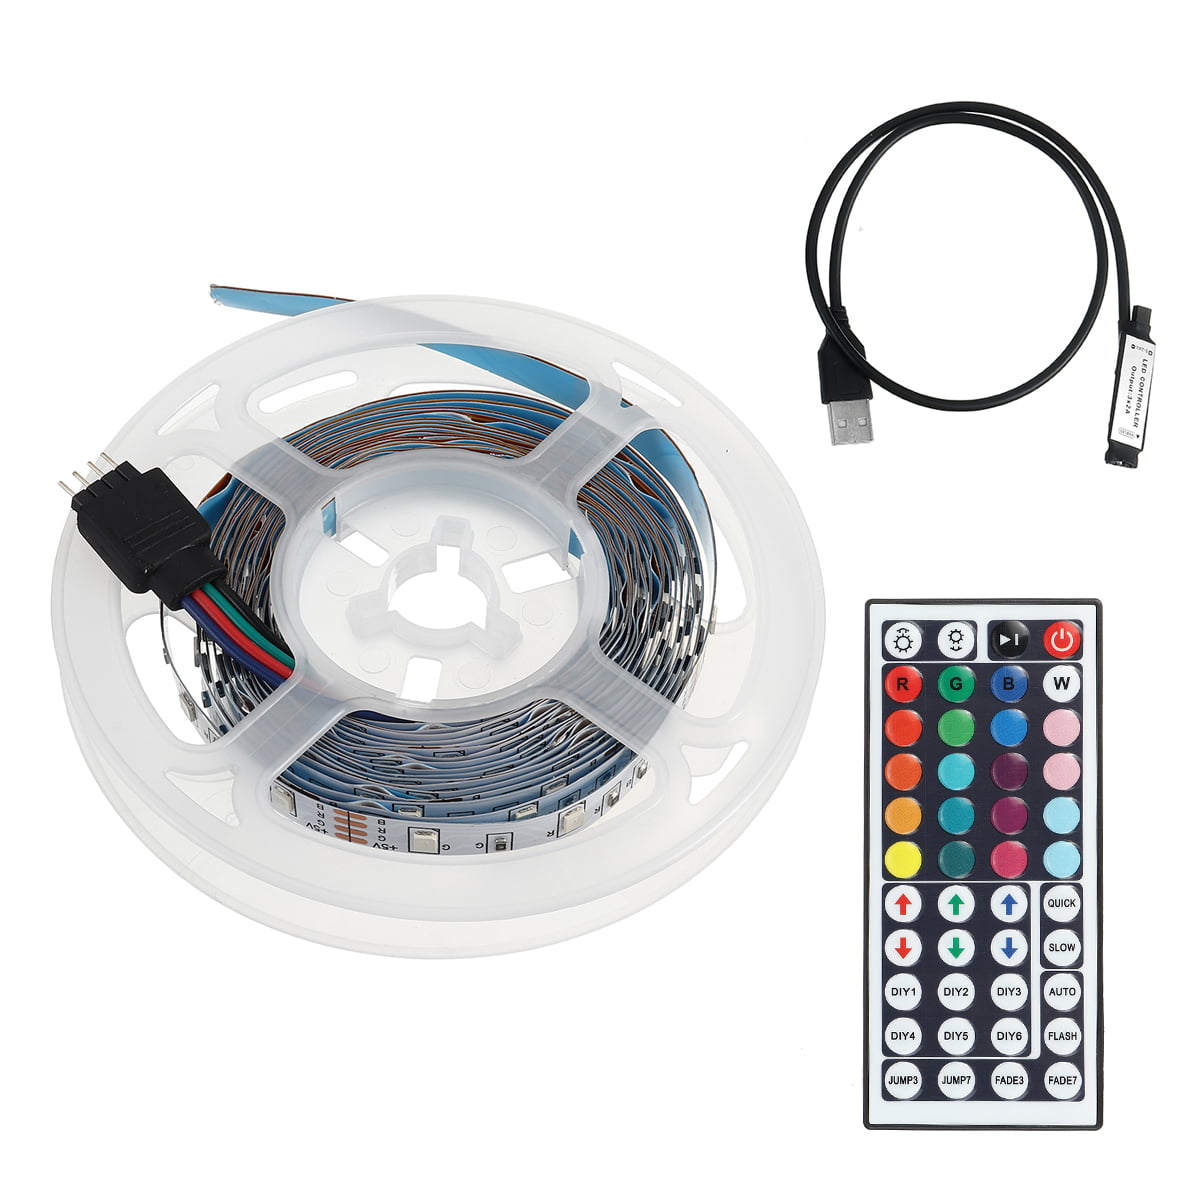 Details about   10M Flexible 3528 RGB LED SMD Strip Light Remote Fairy Lights Room TV Party 